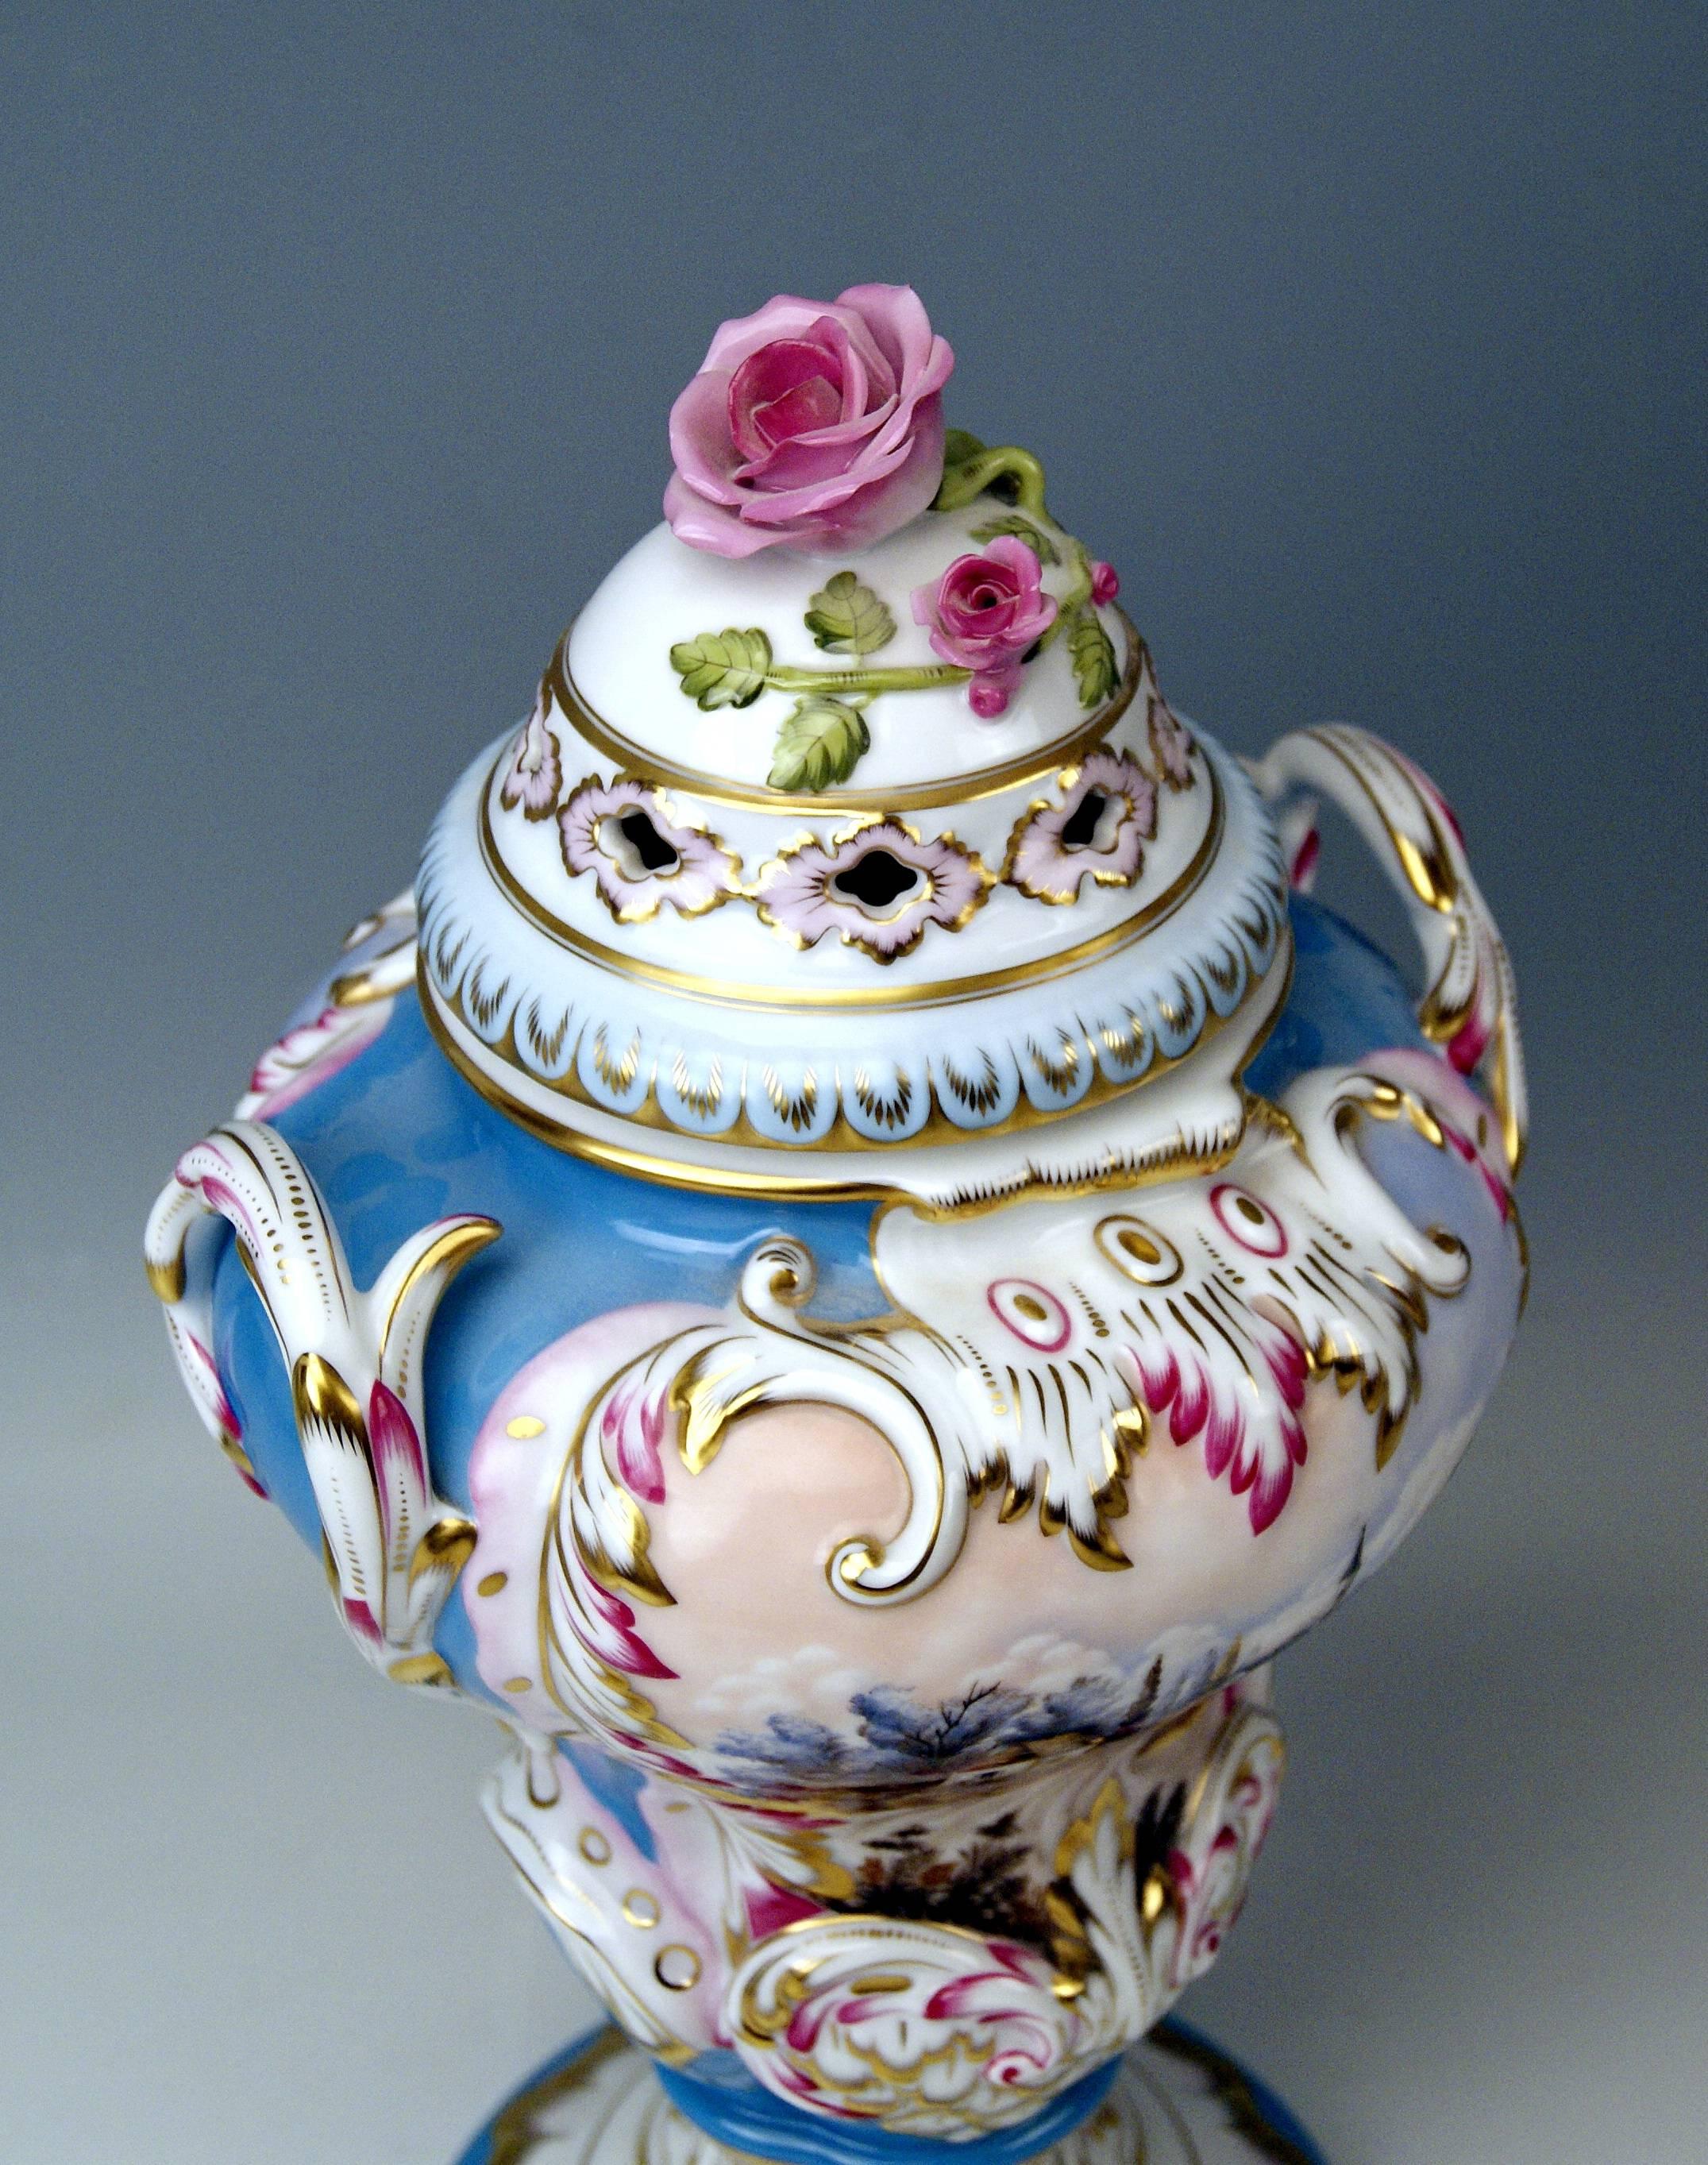 Victorian Herend Lidded Vase Picture Paintings by Istvan Lazar (1993), Height:14.76 inches